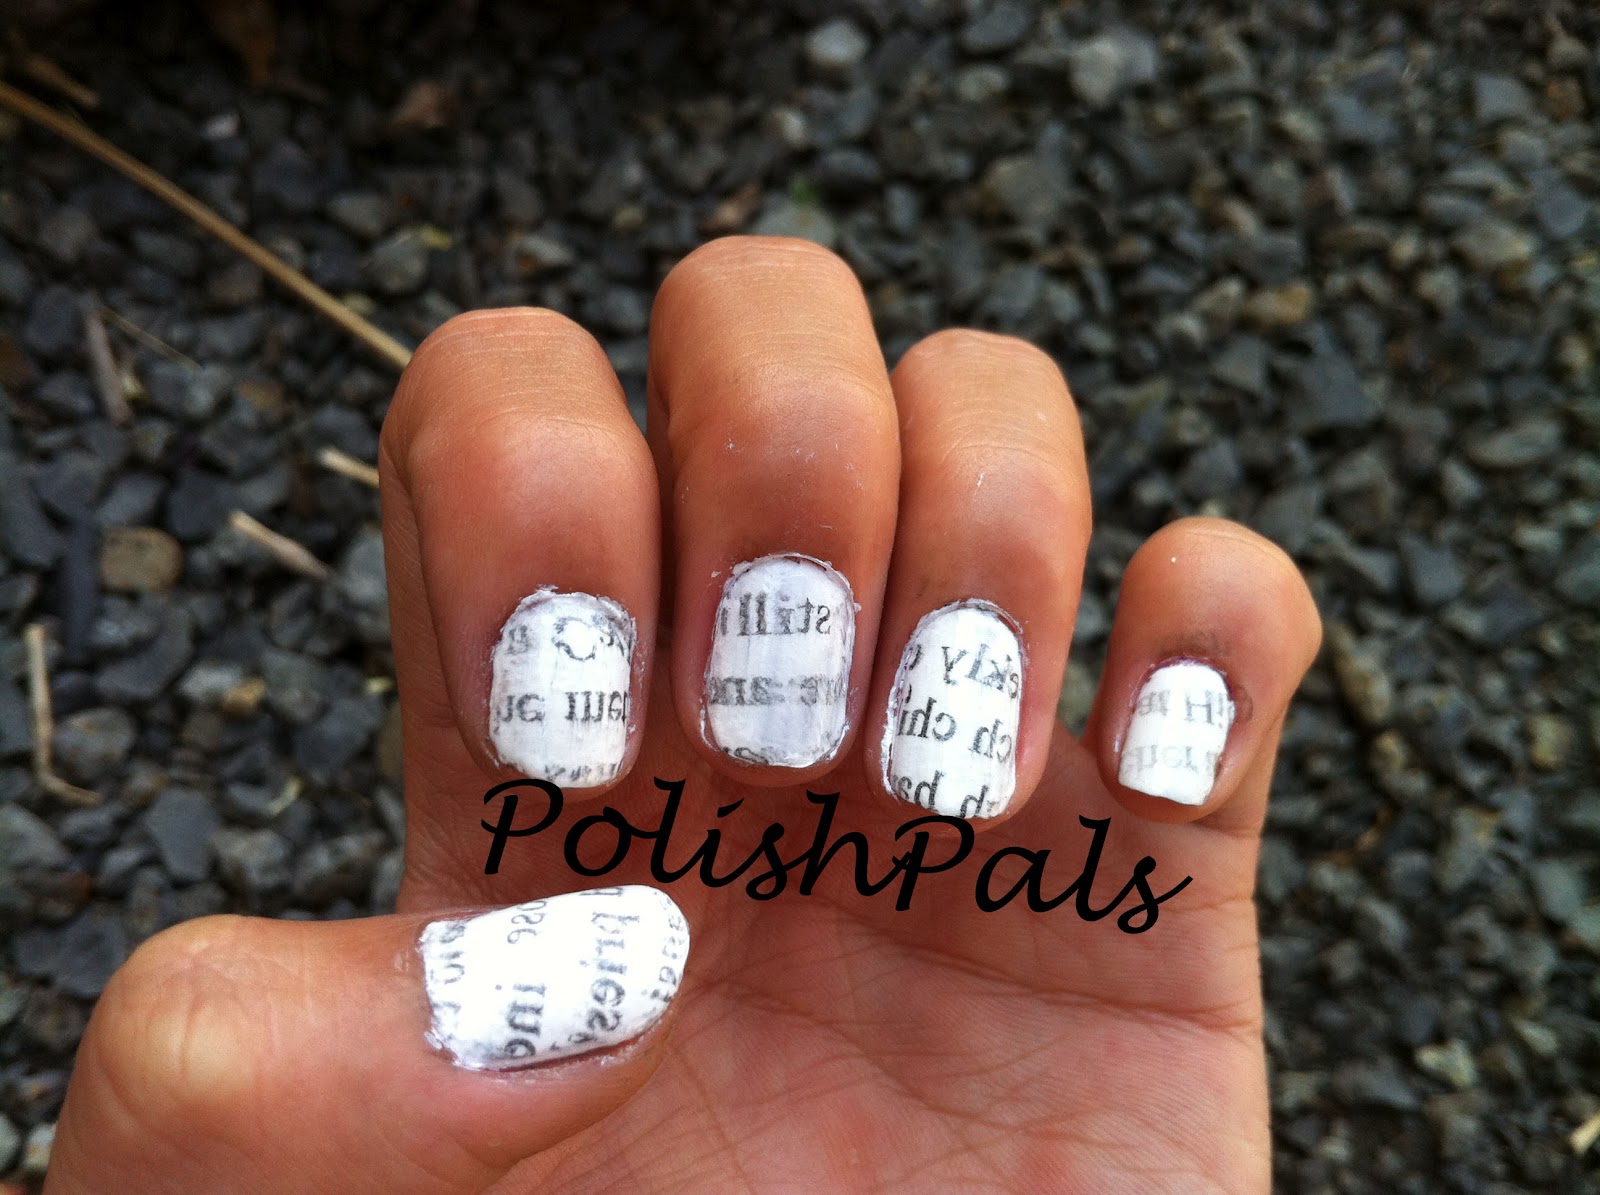 How To Make Newspaper Nails Without Newspaper